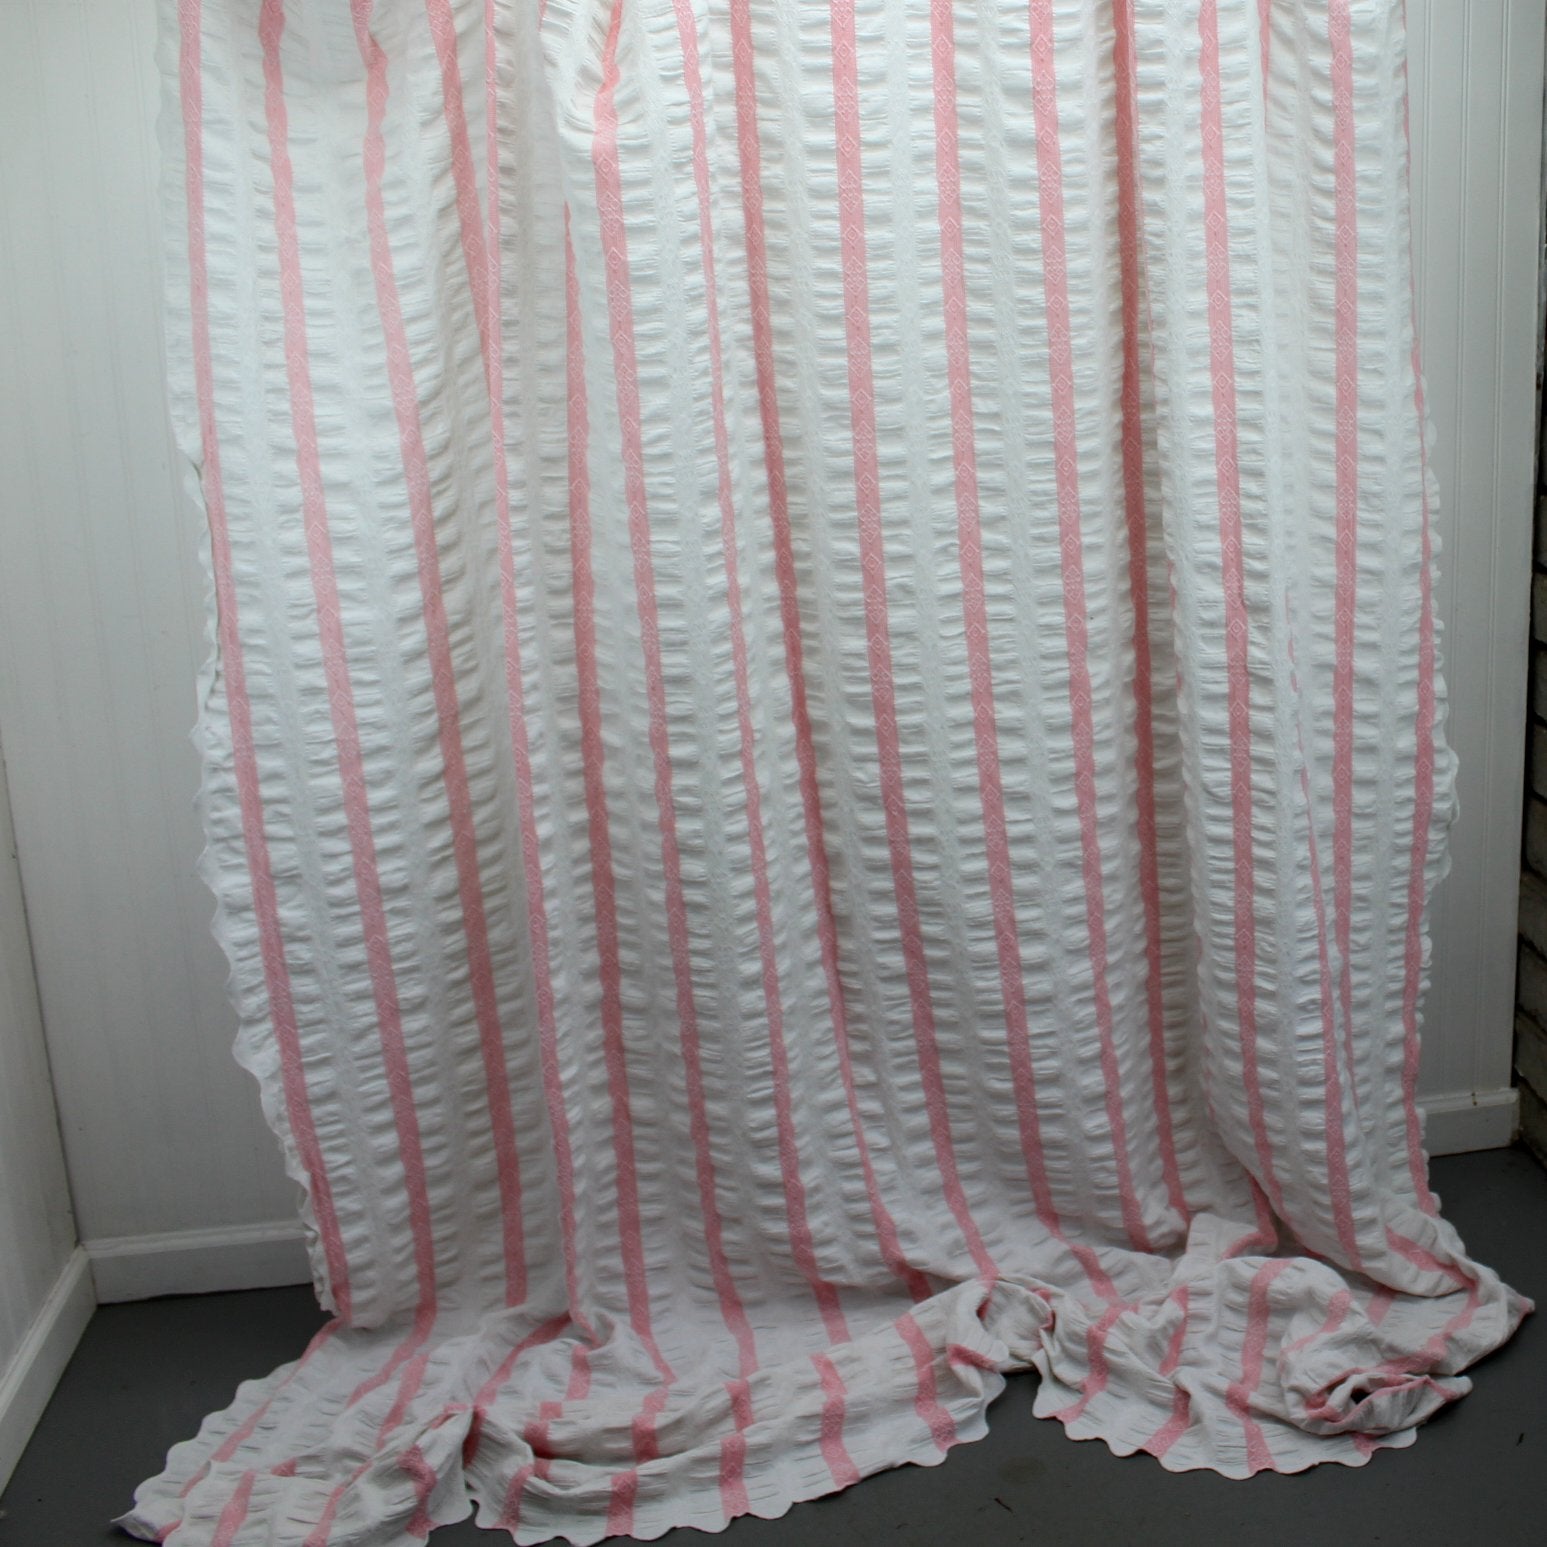 Unusual Ruched Cotton Coverlet Bedspread White Pink Woven Stripe Scalloped Use DIY full view of coverlet